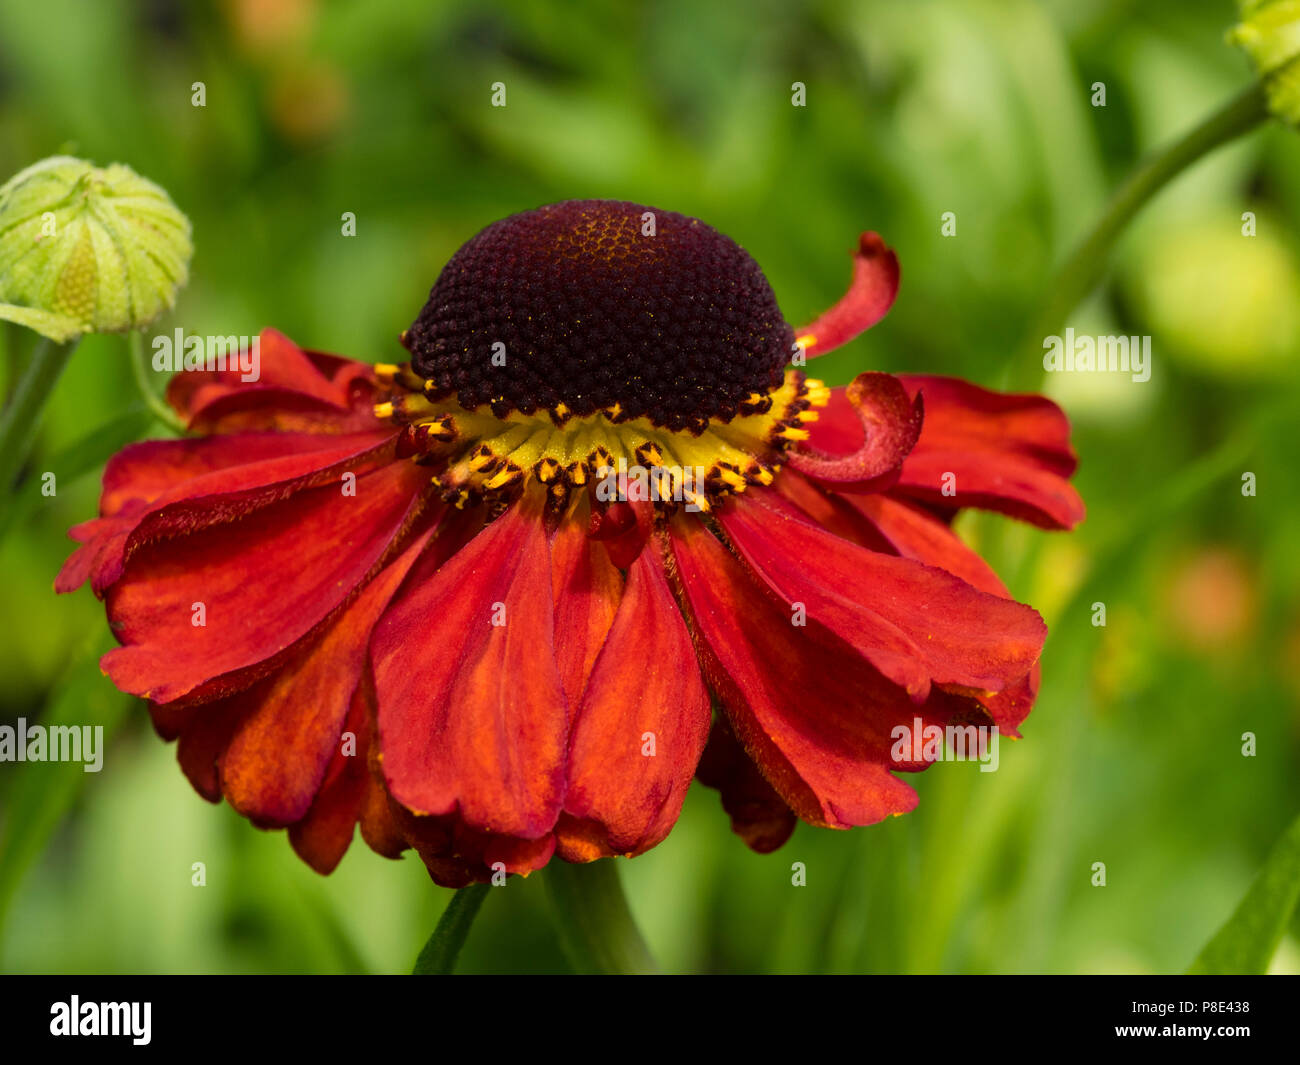 Single flower of the summer blooming perennial sneezeweed, Helenium 'Festival' Stock Photo